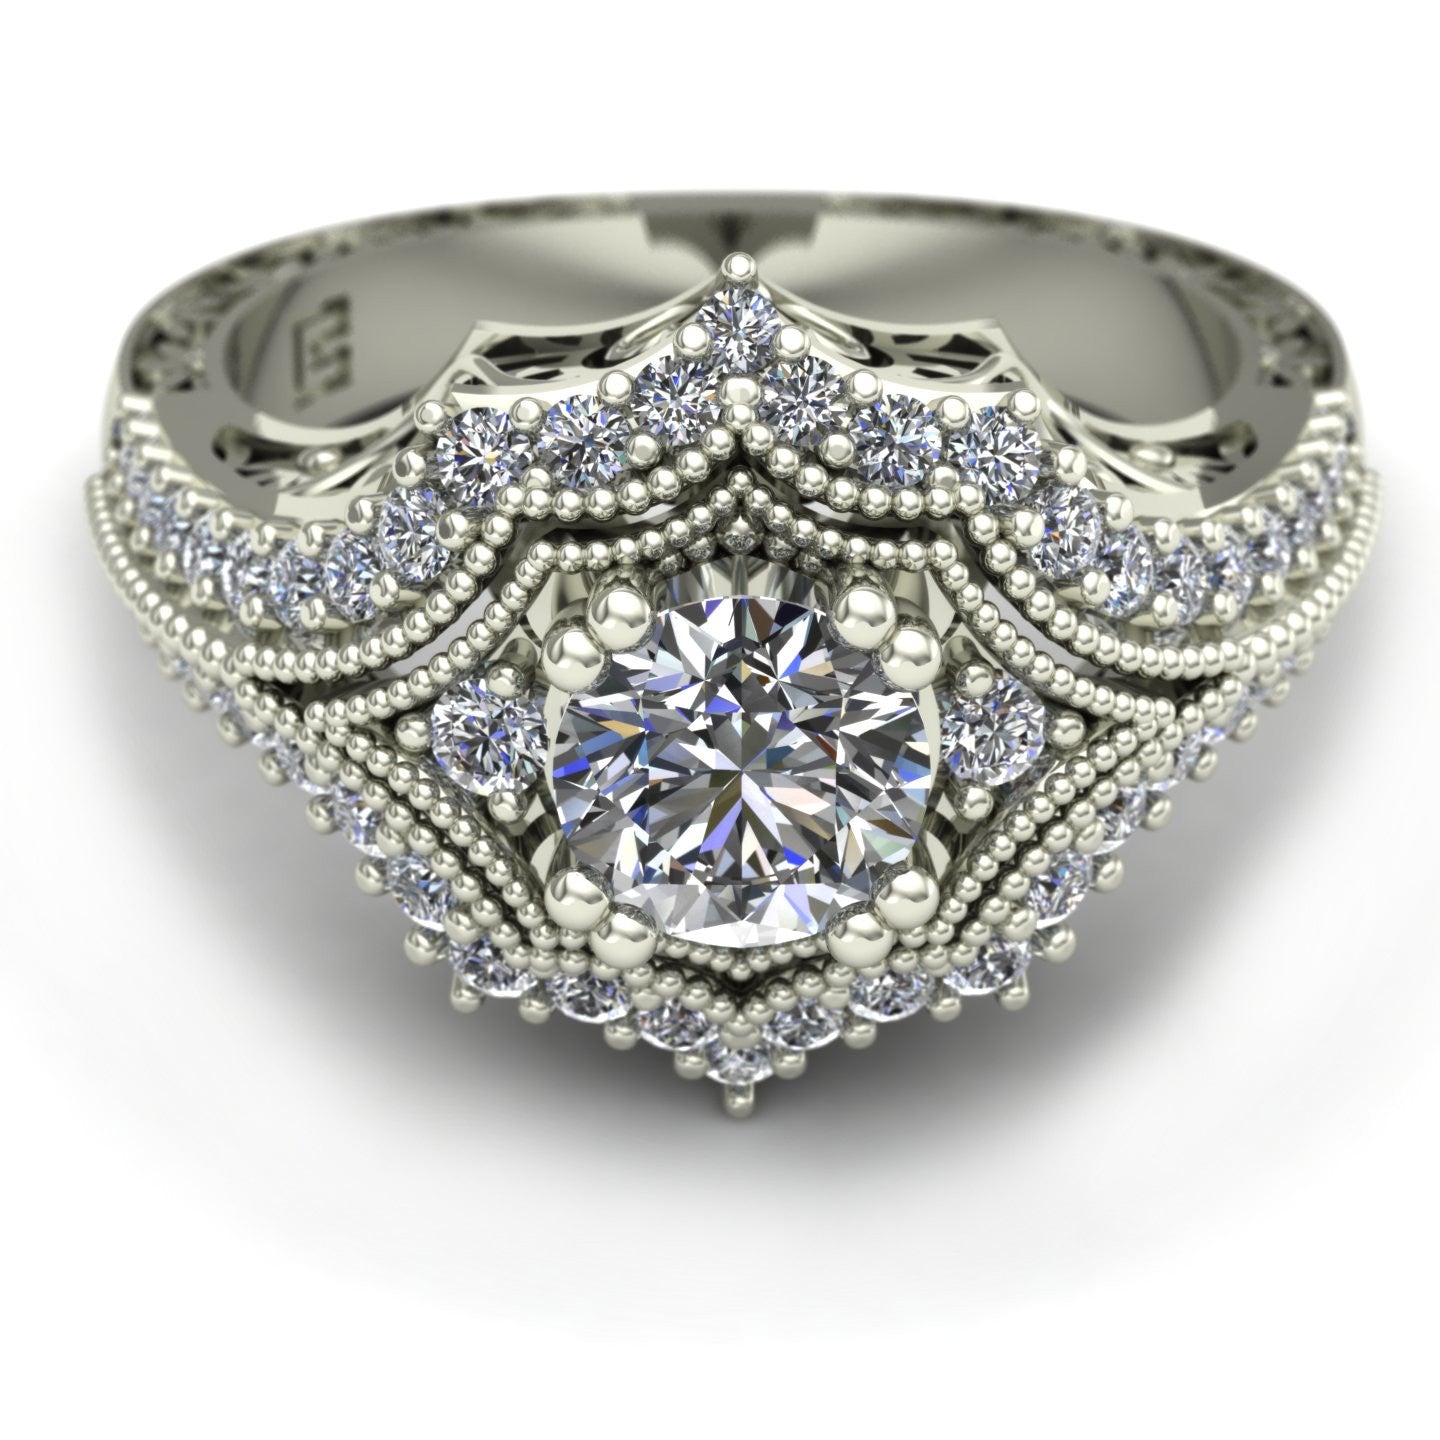 three quarter carat diamond three stone engagement ring with floral carving in 14k white gold - Charles Babb Designs - top view